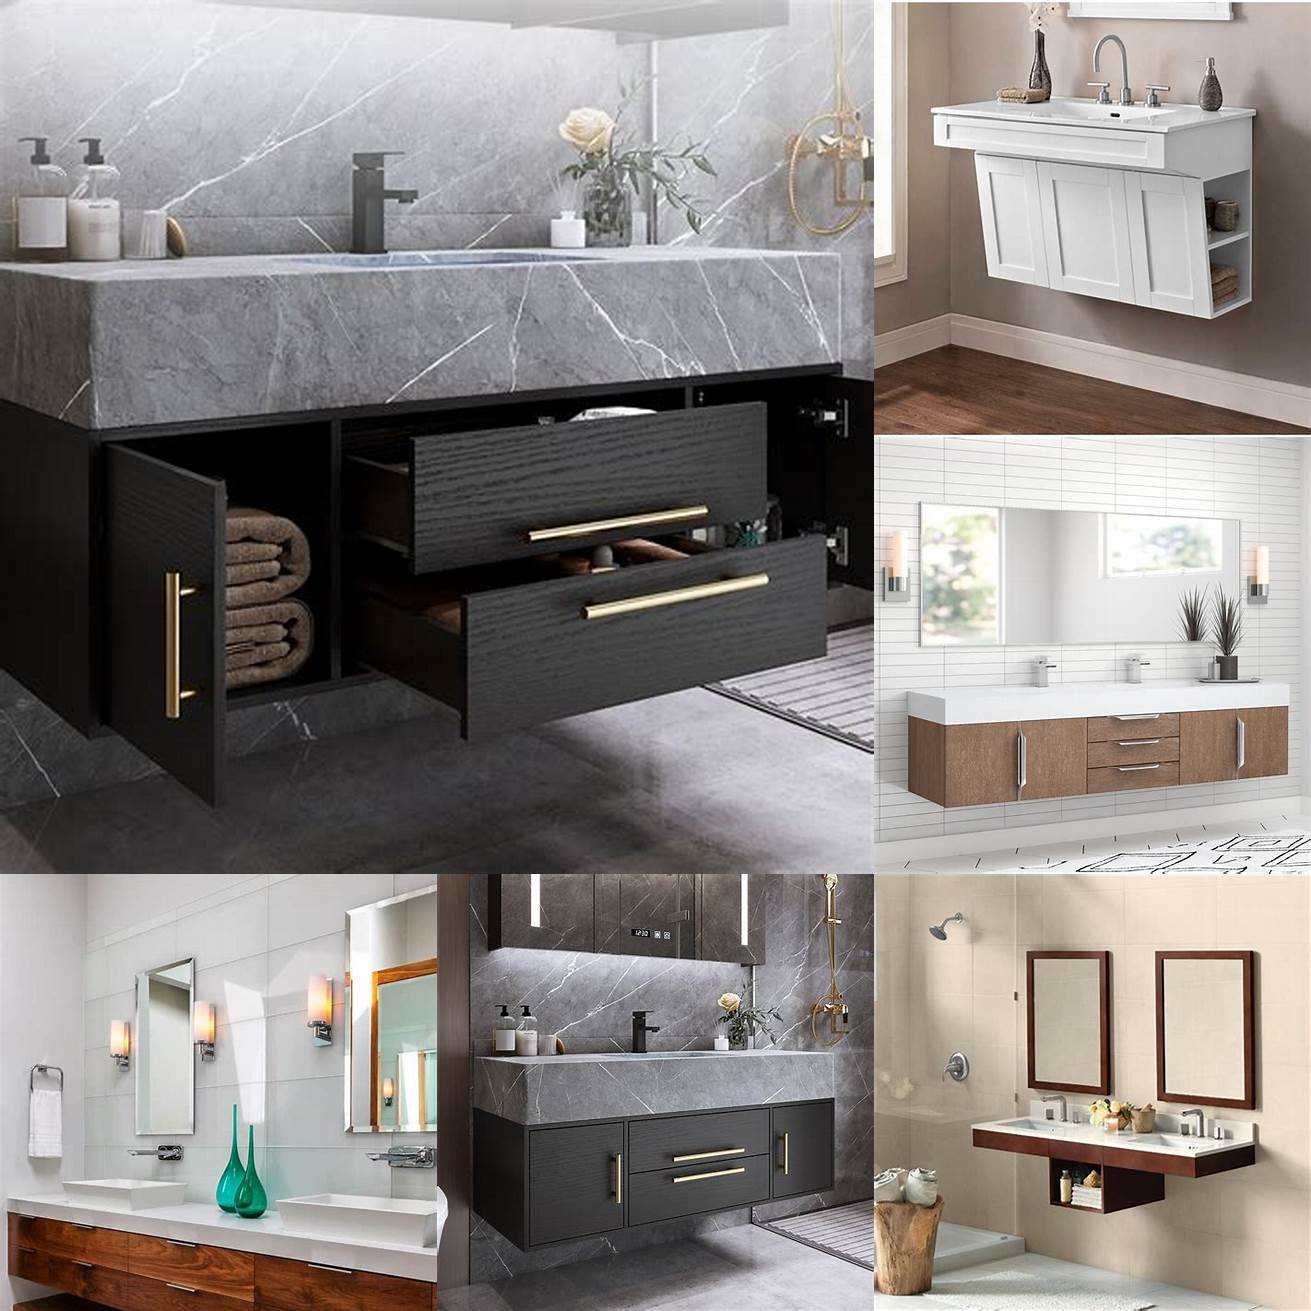 Wall-mounted vanities are attached to the wall freeing up floor space and making your bathroom look bigger They come in different styles and sizes and they can be made of different materials such as wood metal and glass They are easy to install and provide ample storage space However they require professional installation and can be more expensive than other types of vanities